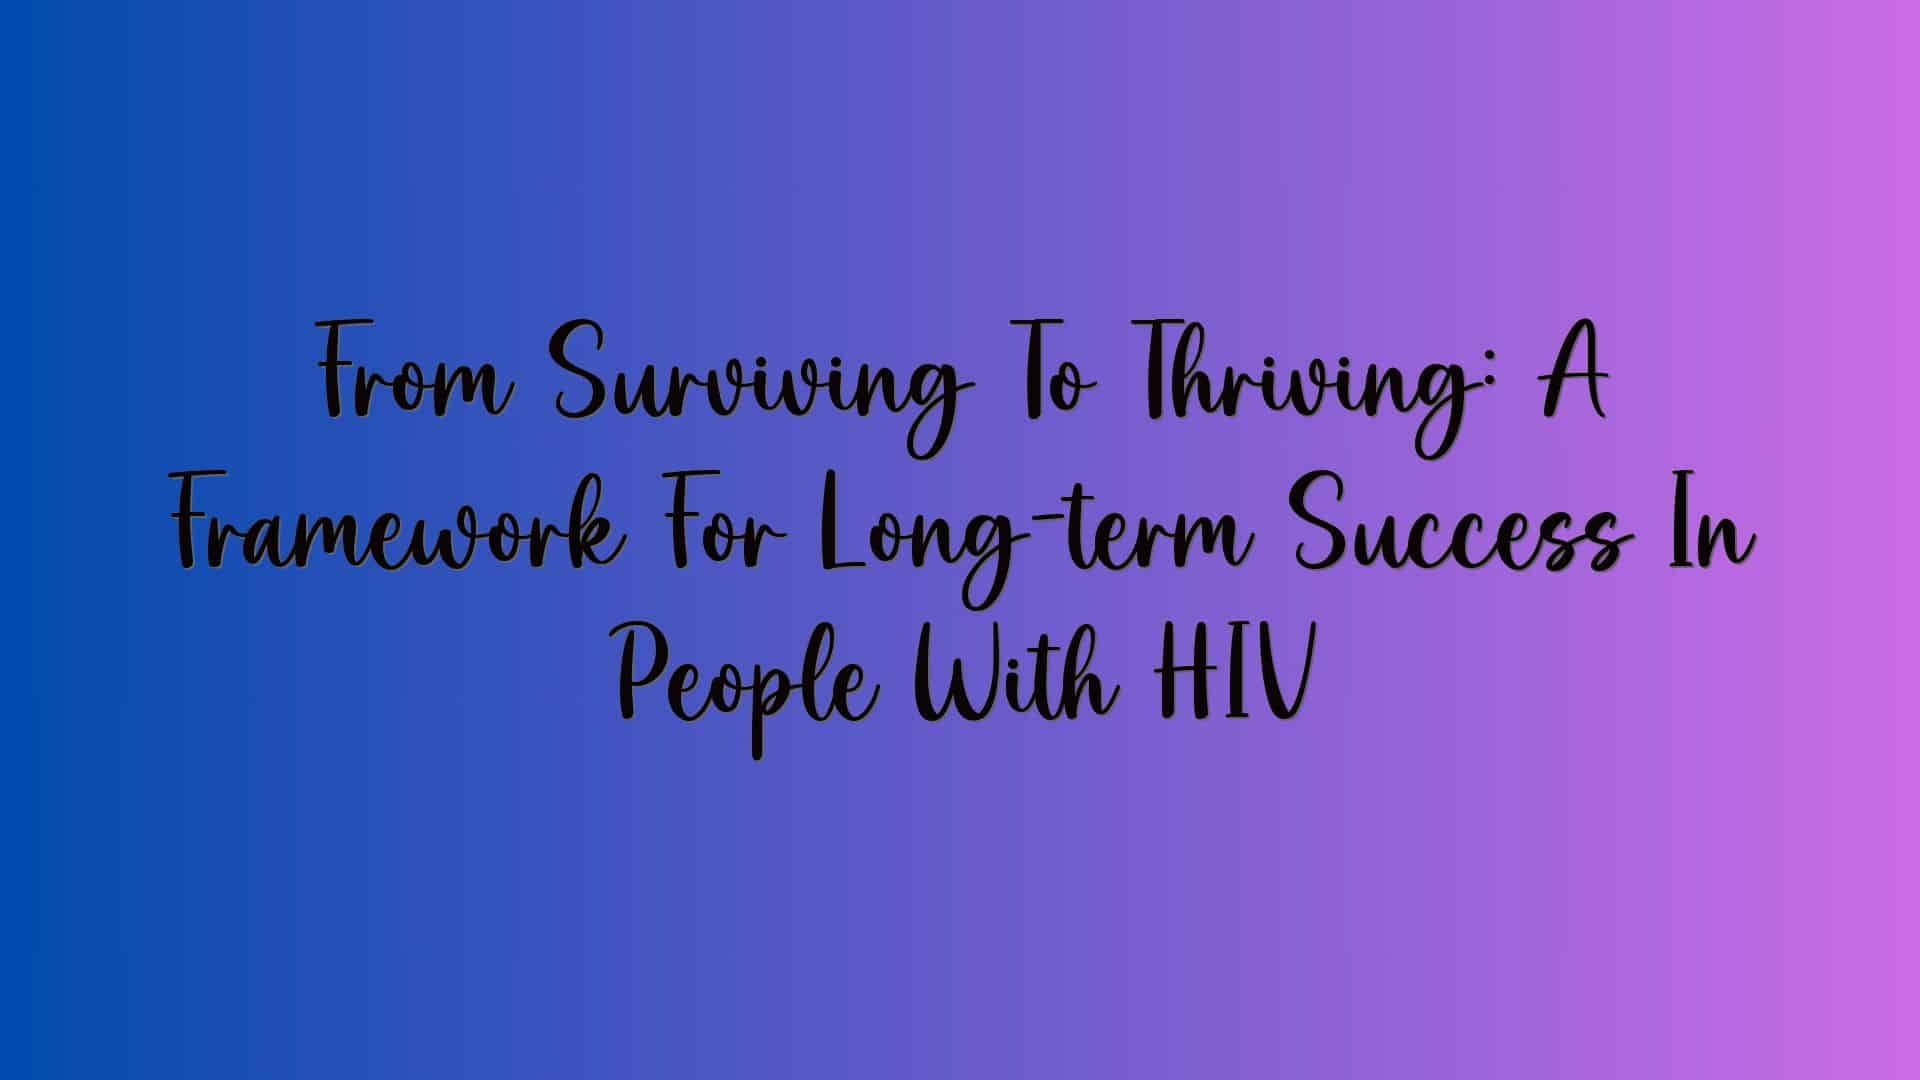 From Surviving To Thriving: A Framework For Long-term Success In People With HIV